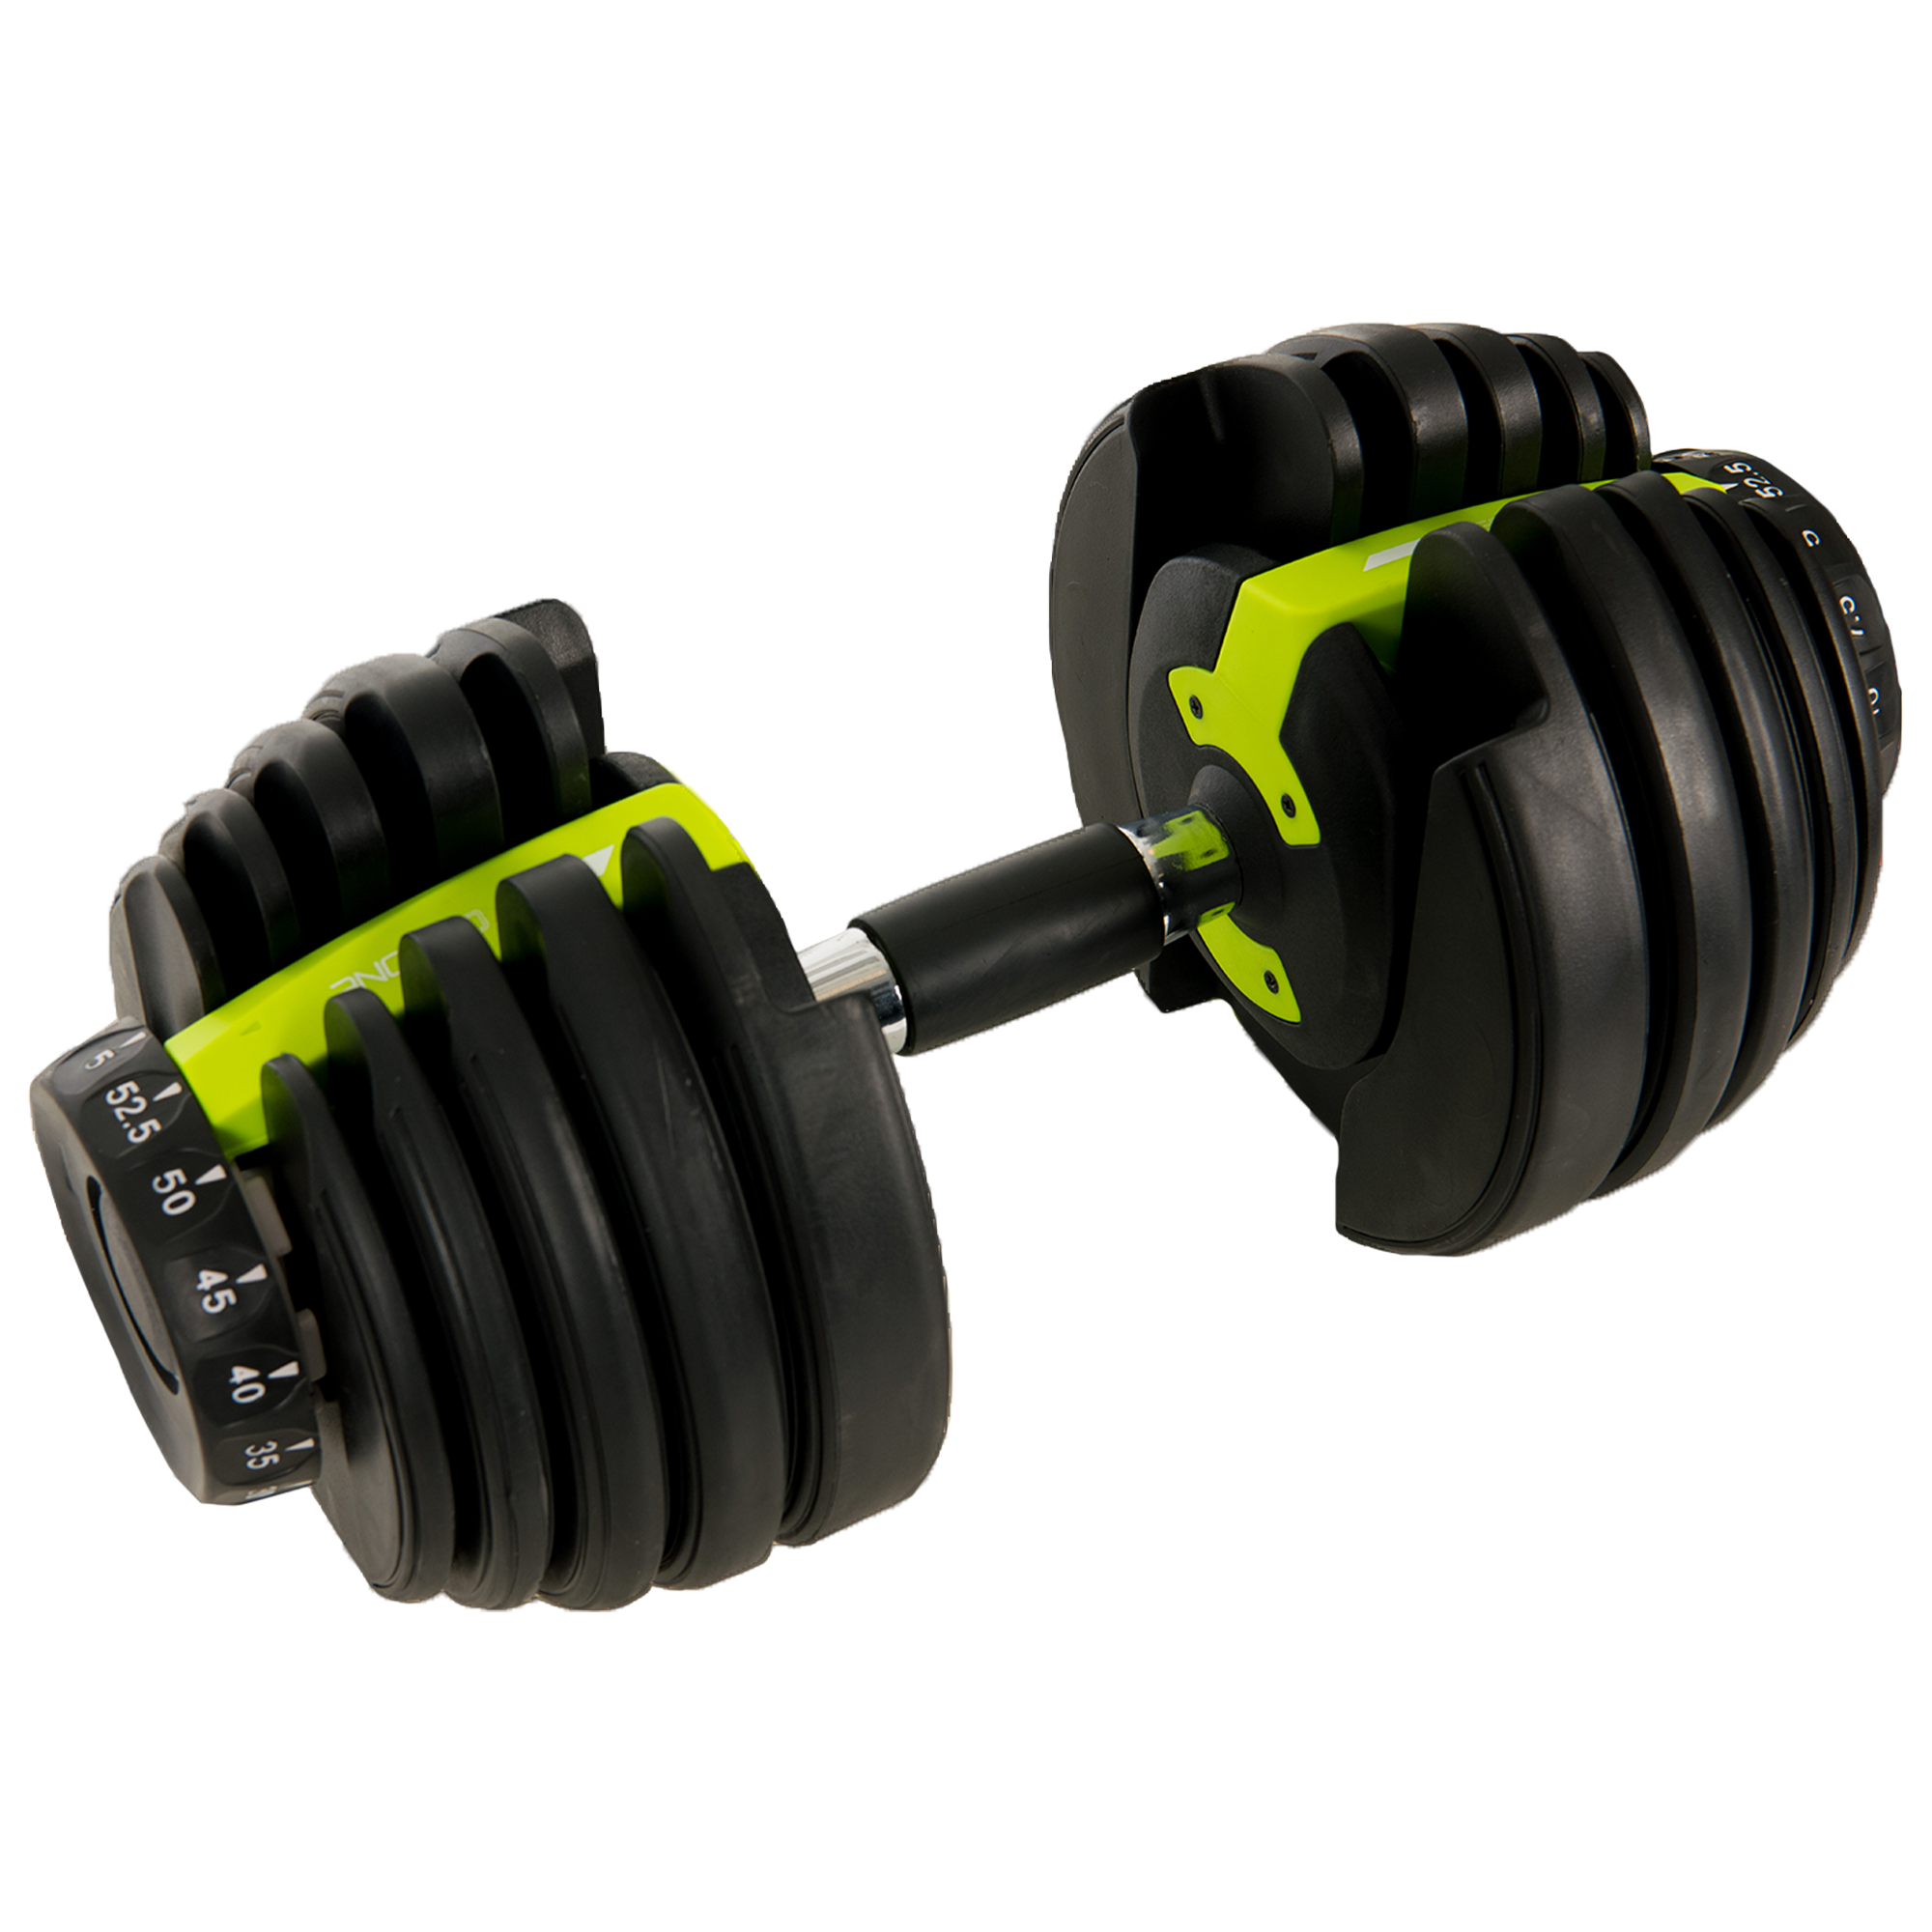 GoZone 50lb Multi-Use Weight Set – Green/Black, Made from durable